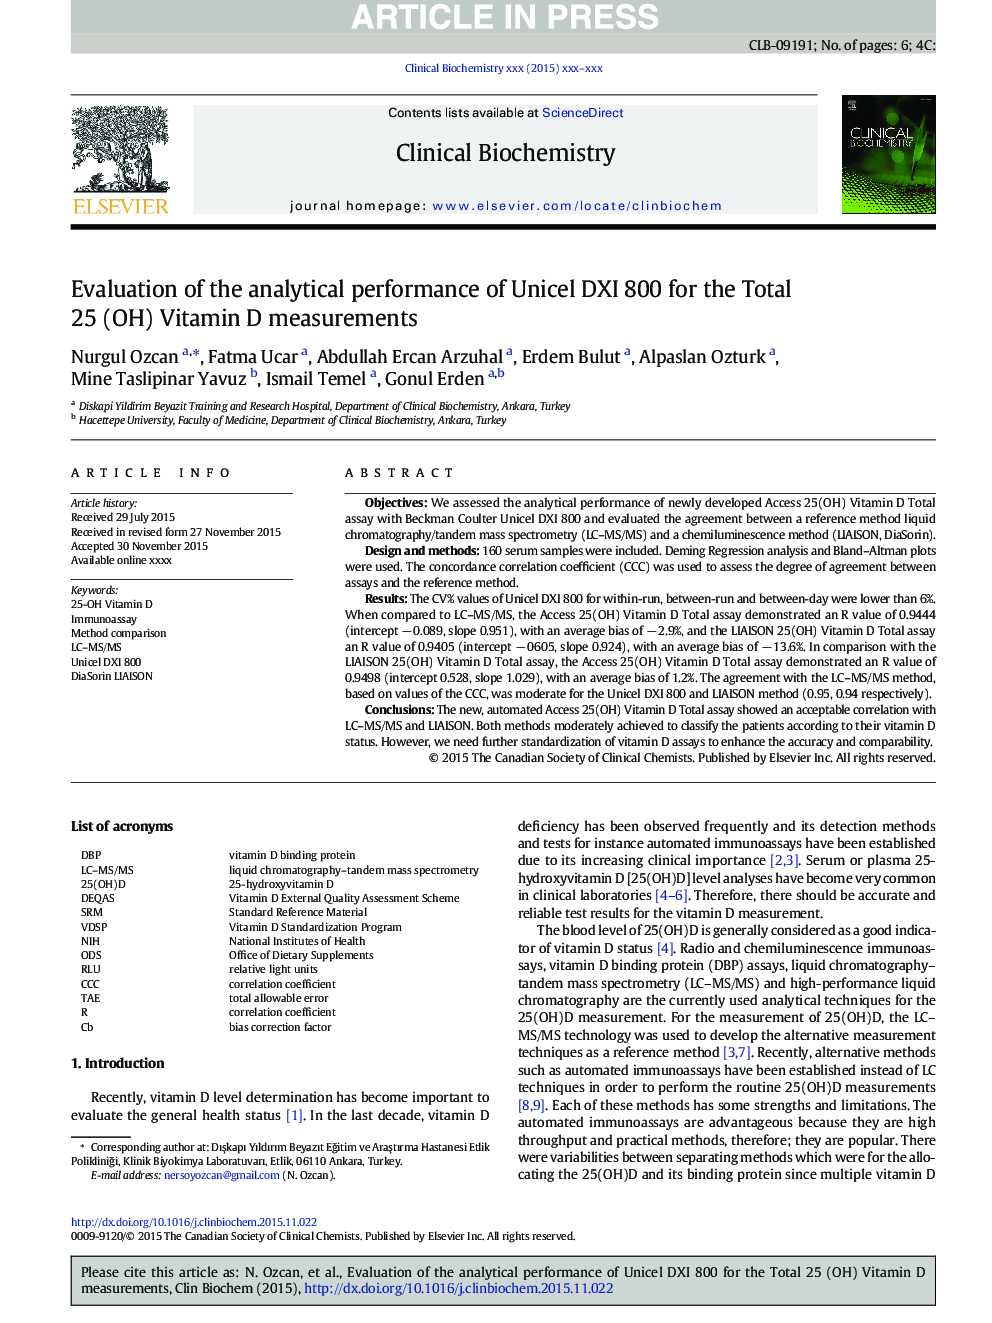 Evaluation of the analytical performance of Unicel DXI 800 for the Total 25 (OH) Vitamin D measurements